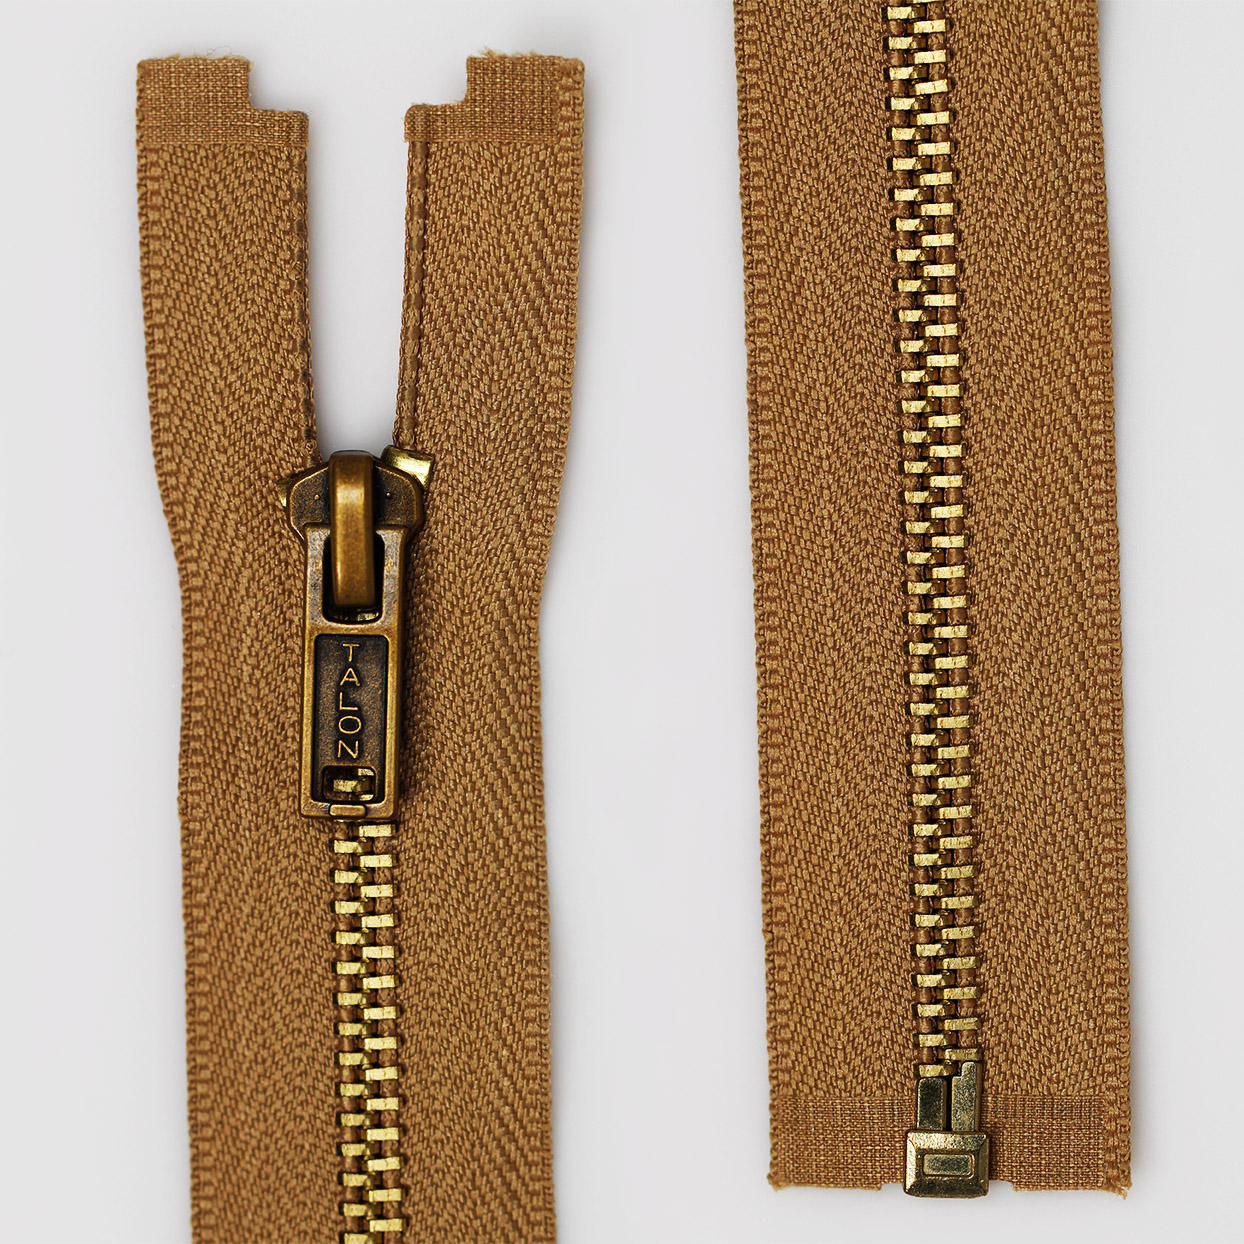 Vintage Military TALON Brass Zippers USA MADE Size 16 Inches 40 Cm Rare! #3